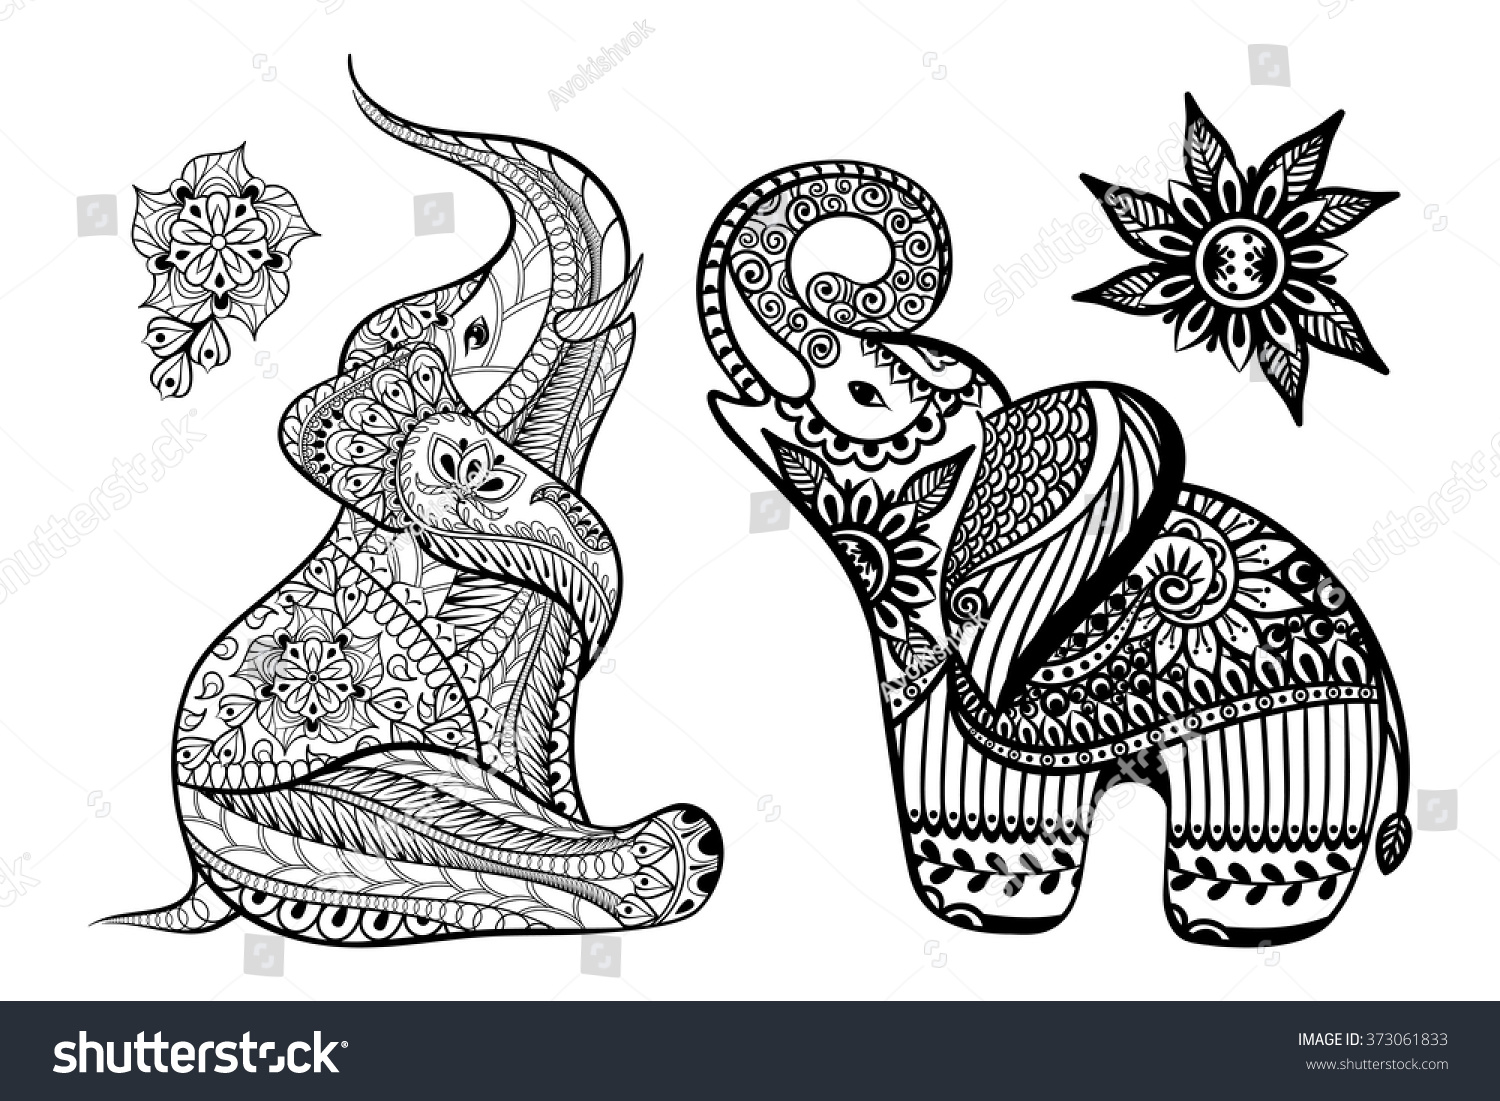 SVG of Set of Hand drawn stylized elephants with decorative tribal ethnic ornament in zentangle style. Vector animal patterned illustration isolated on white background for coloring book. svg